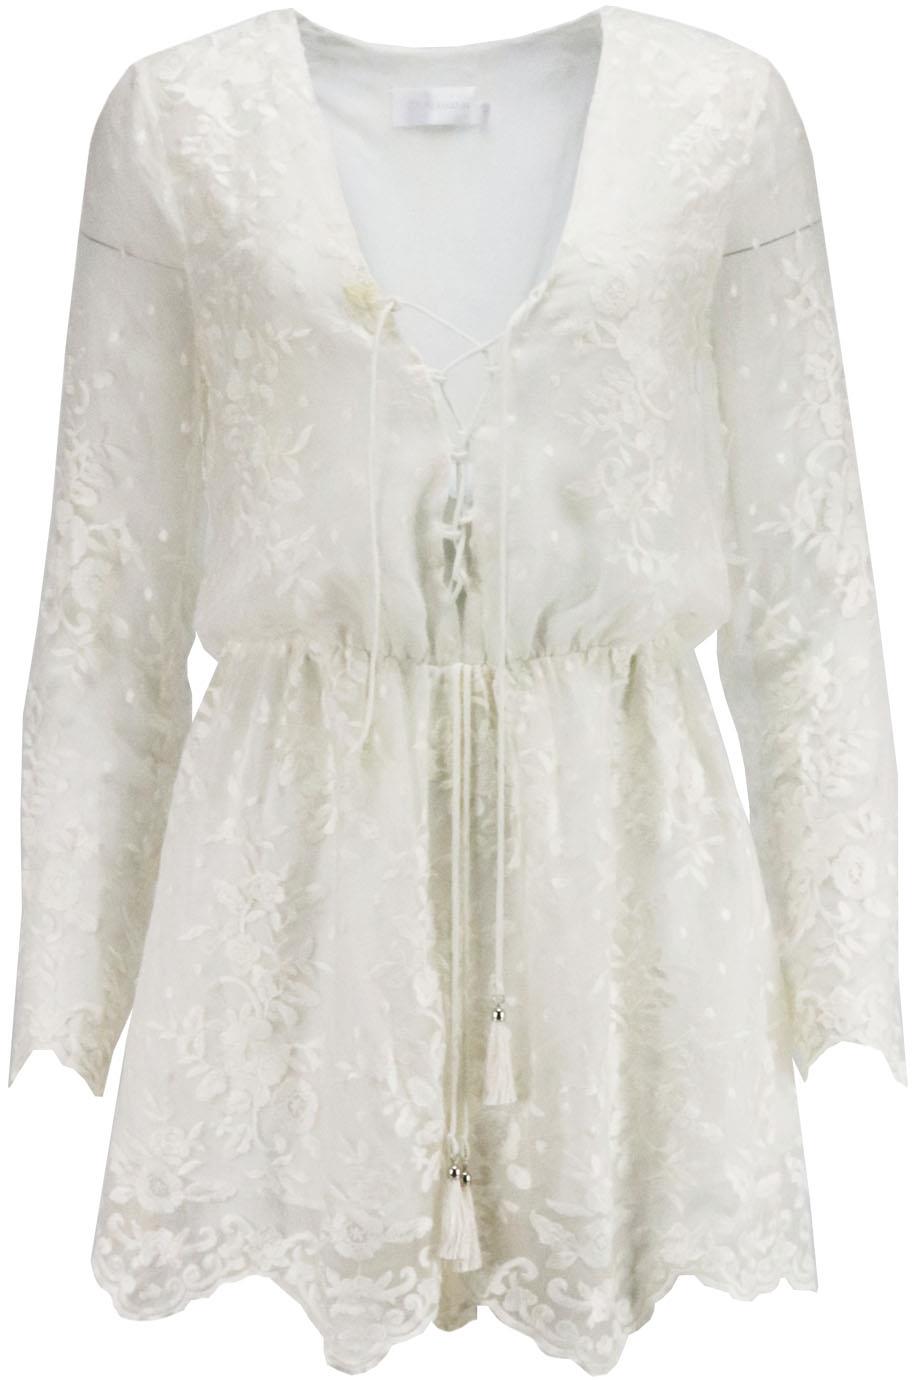 ZIMMERMANN LUCIA LACE UP EMBROIDERED SILK GEORGETTE PLAYSUIT UK 8